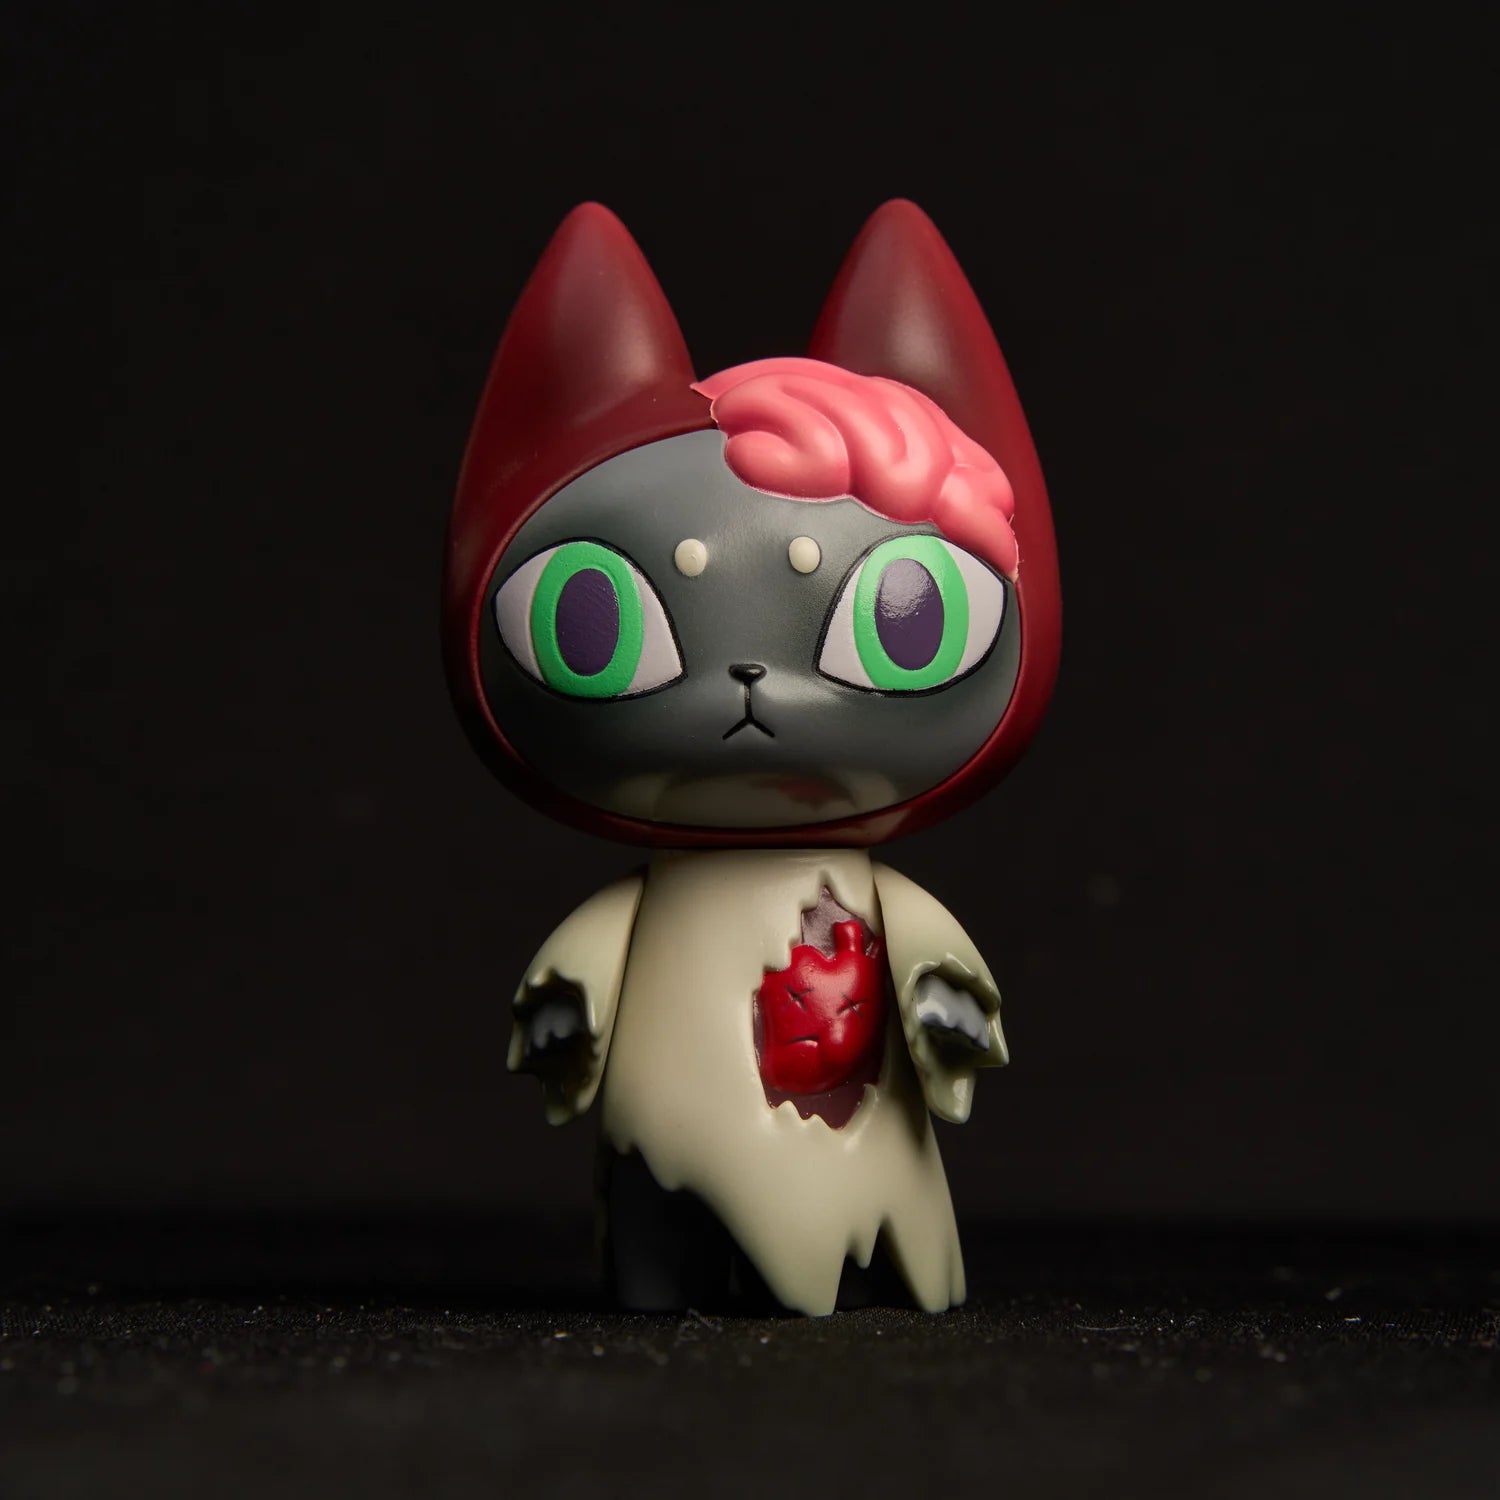 BAD MEAW 'RAGS' Vintage Horror Edition by MUEANFUN SAPANAKE